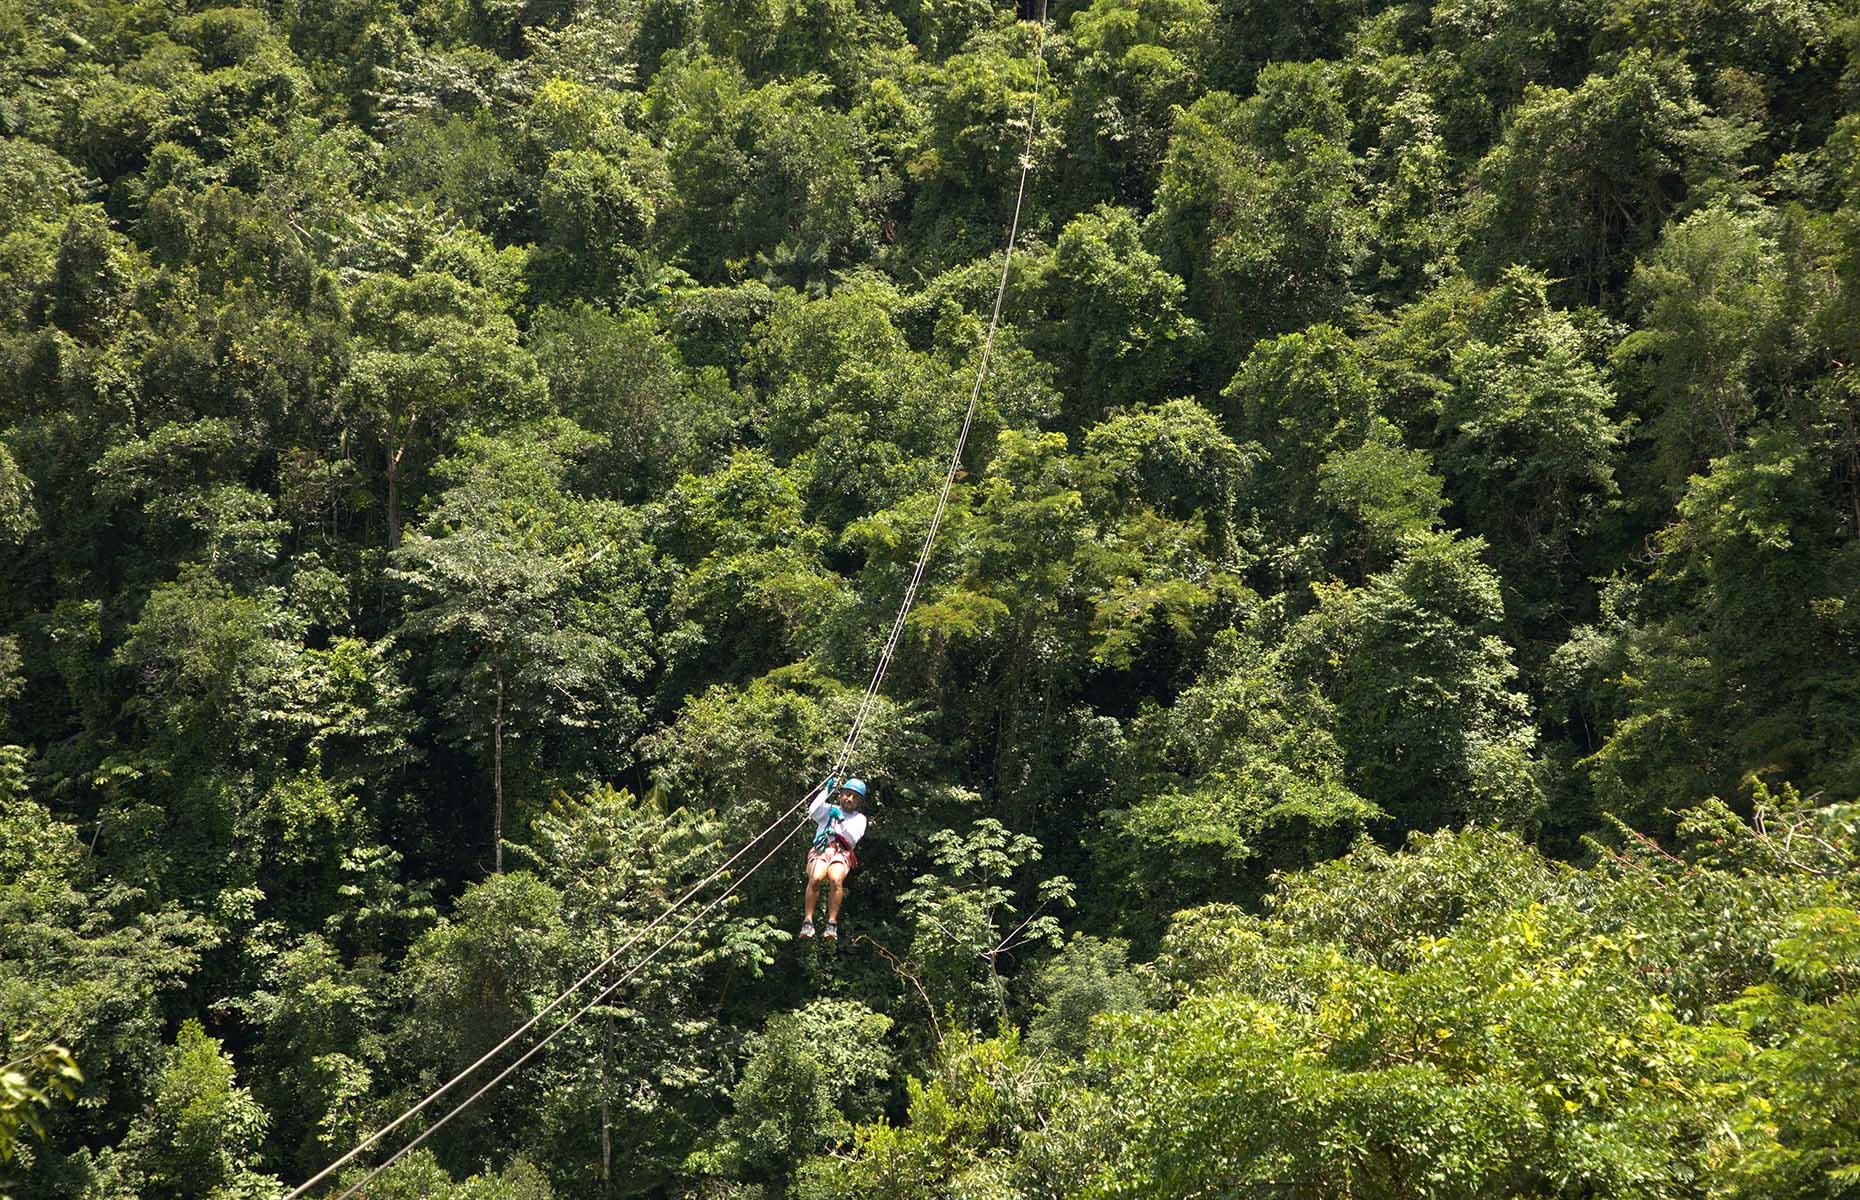 <p>A strange mixture of adrenaline and serenity, it's hard to quite describe the feeling of soaring above the canopy across a steep-sided river valley, impenetrable jungle rising on both sides as far as the eye can see. Seven zip lines criss-cross the South Stann Creek River – a short drive from the Maya King Waterfall and often included in the same tour – sending tourists hurtling between a series of sturdy wooden platforms barely visible among the trees. The rush of wind can feel overwhelming, but remember to look around and take in a view usually enjoyed only by helicopter cameramen filming nature documentaries.</p>